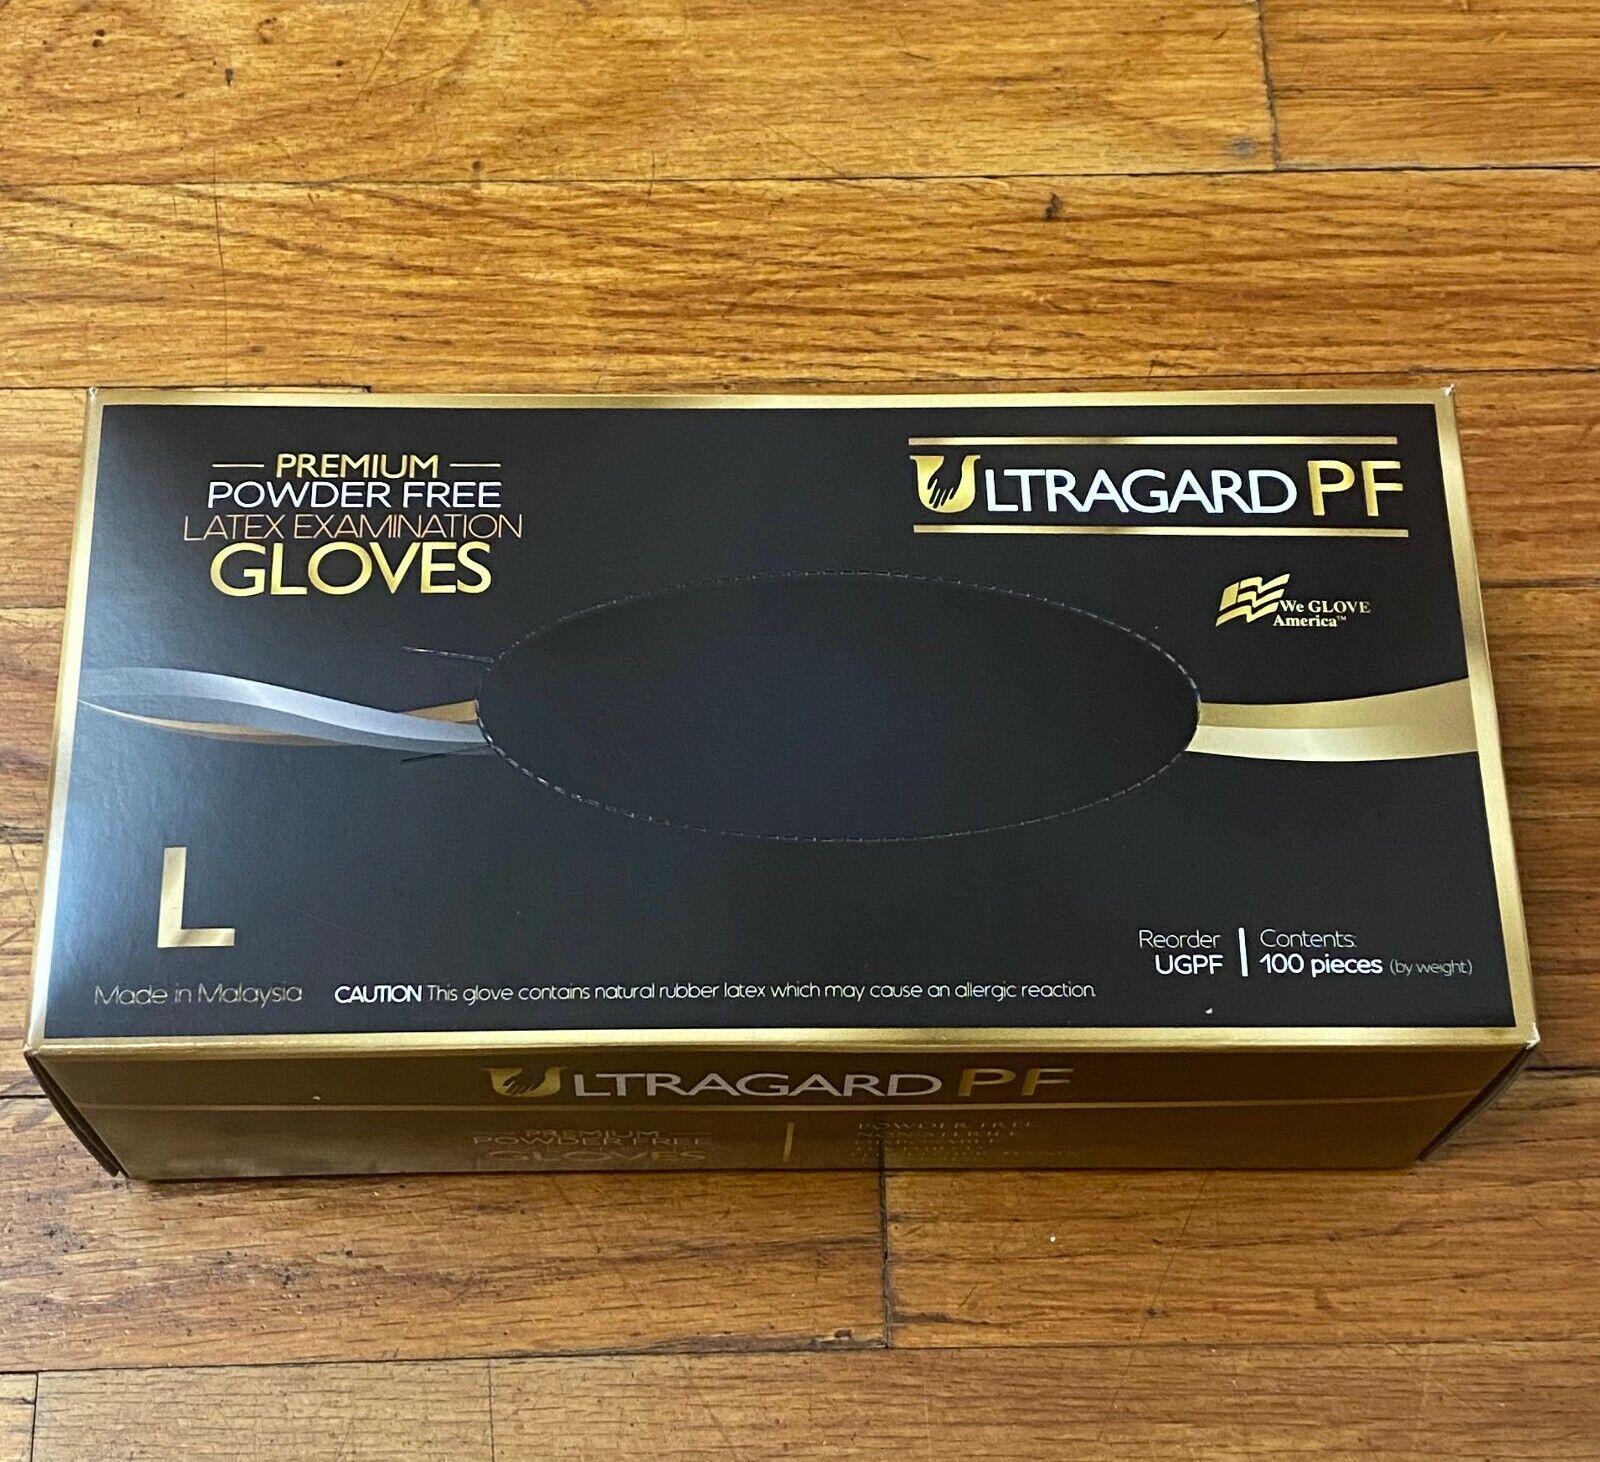 Large Latex Exam Gloves 1000 gloves (10 boxes of 100 gloves) Ultragard